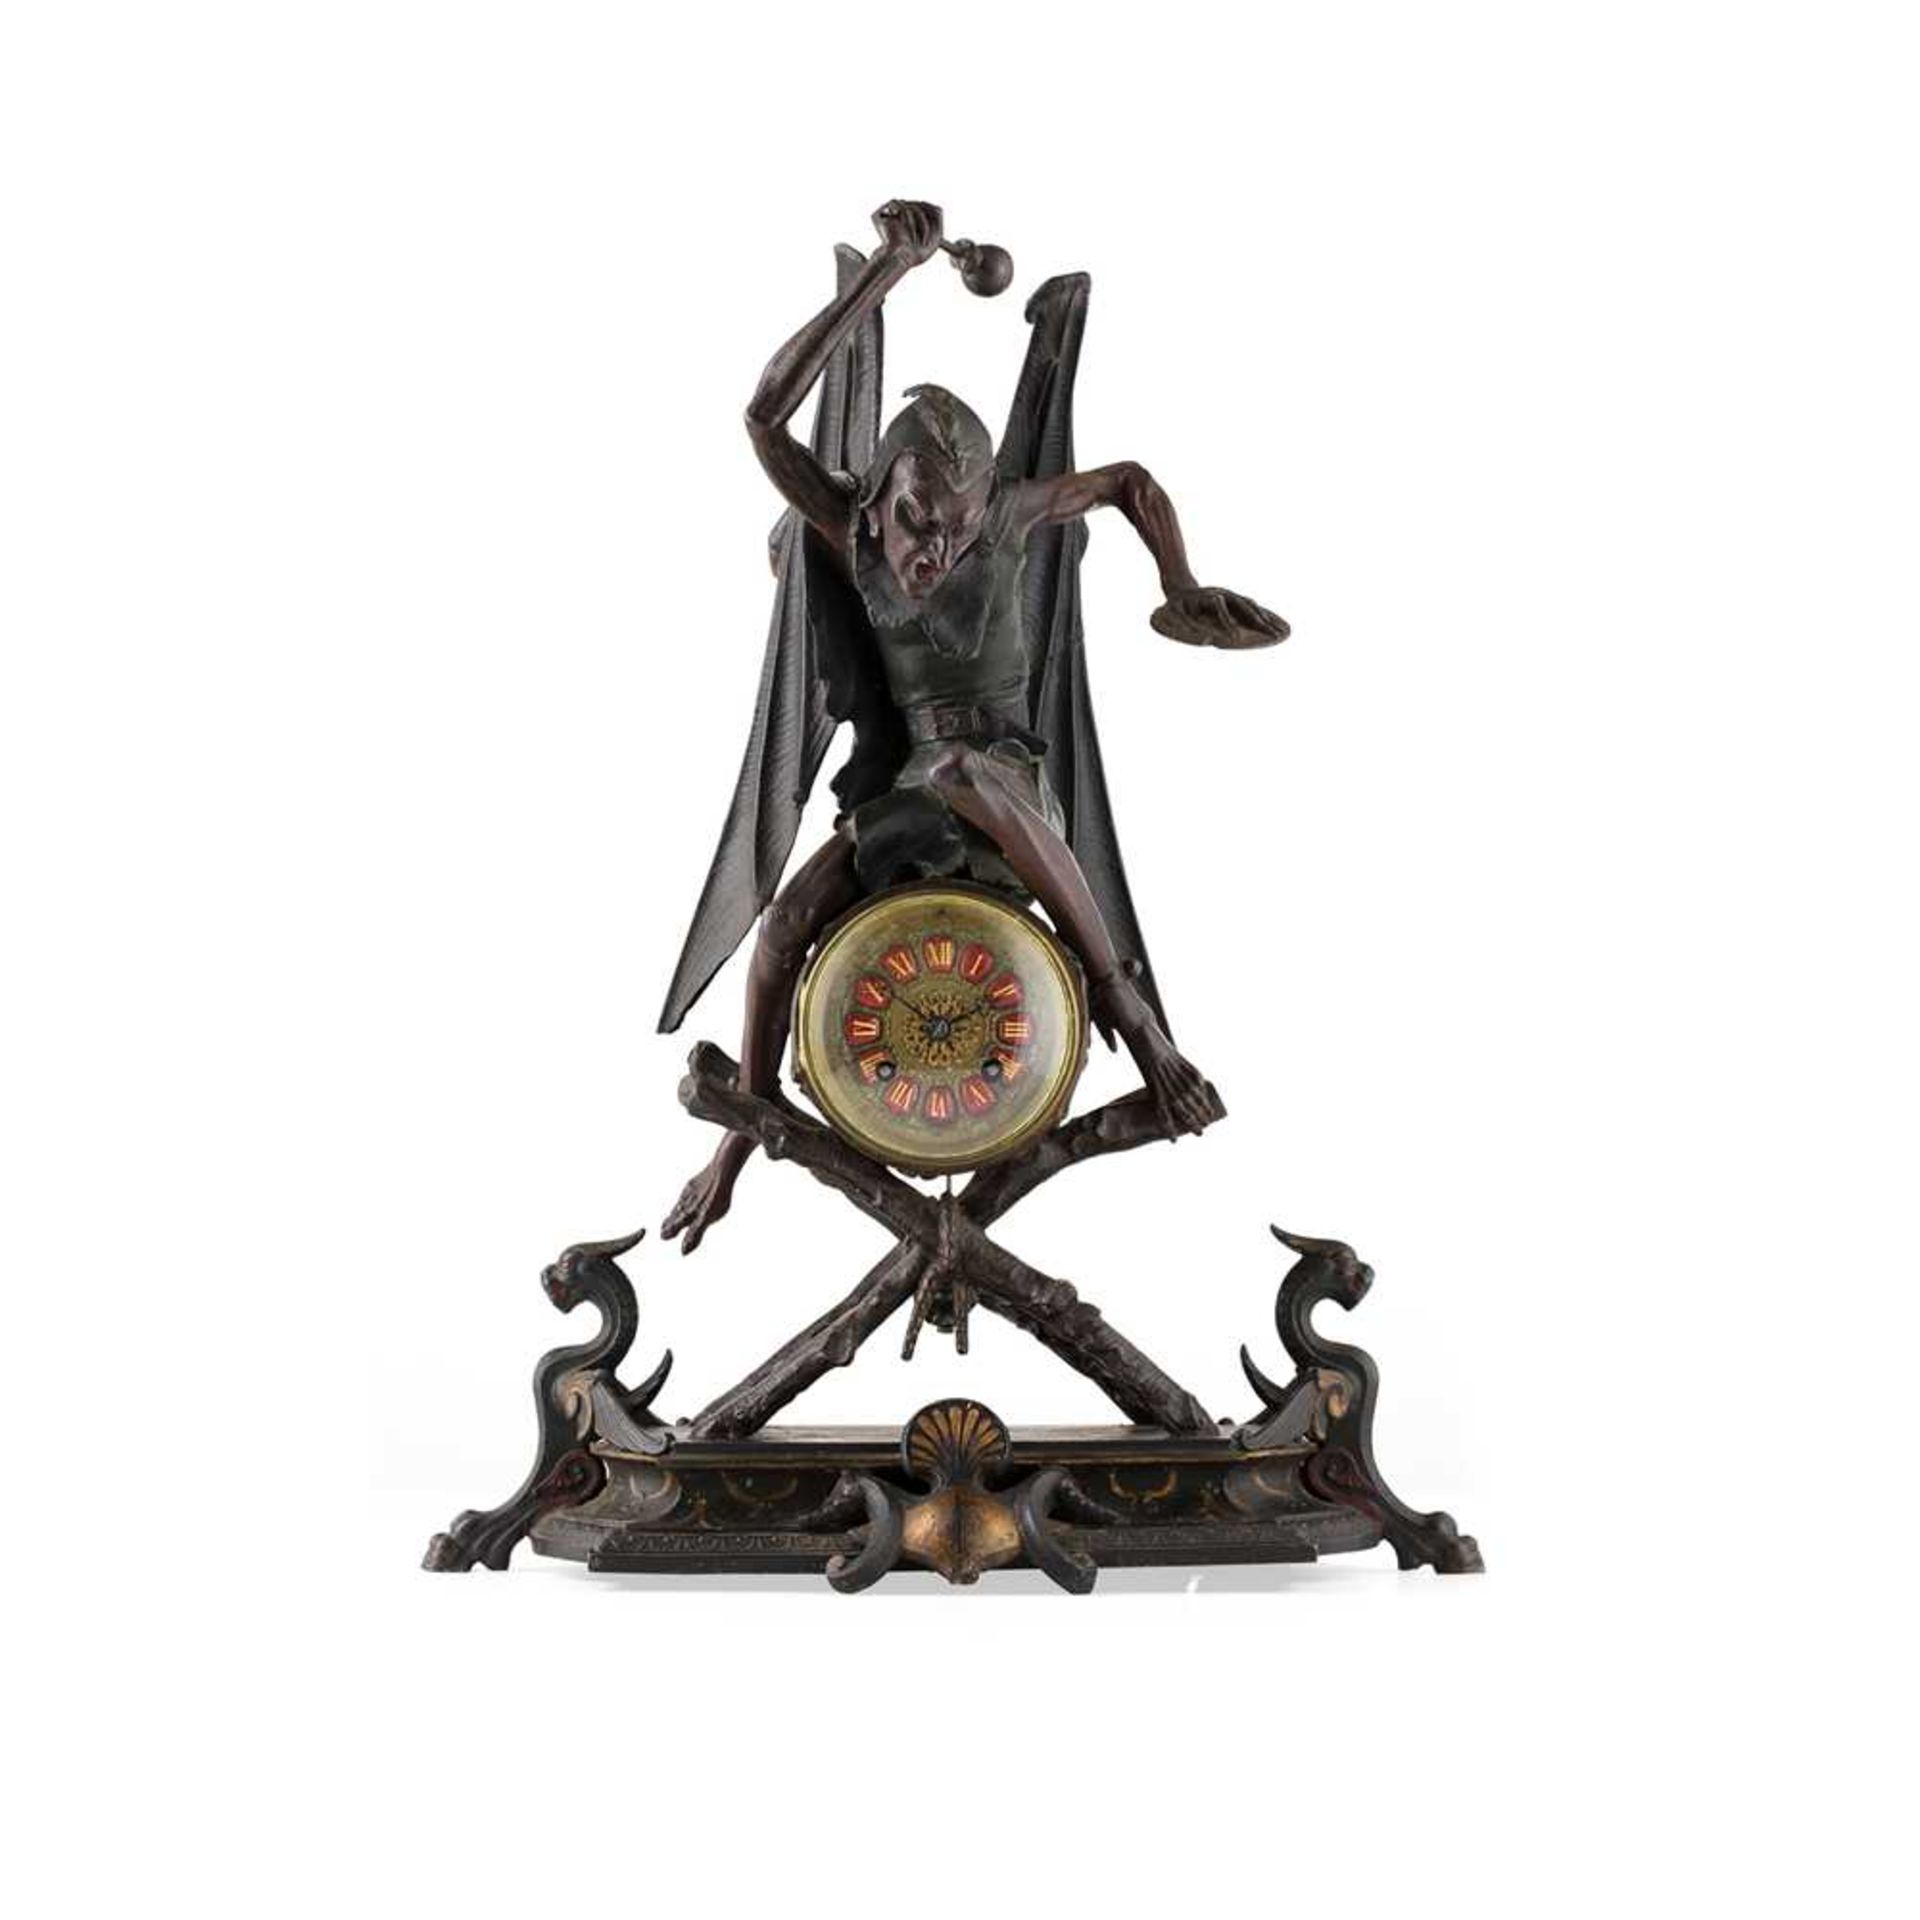 FRENCH COLD-PAINTED SPELTER 'DEVIL' MANTEL CLOCK, ATTRIBUTED TO DUFAUD, PARIS 19TH CENTURY